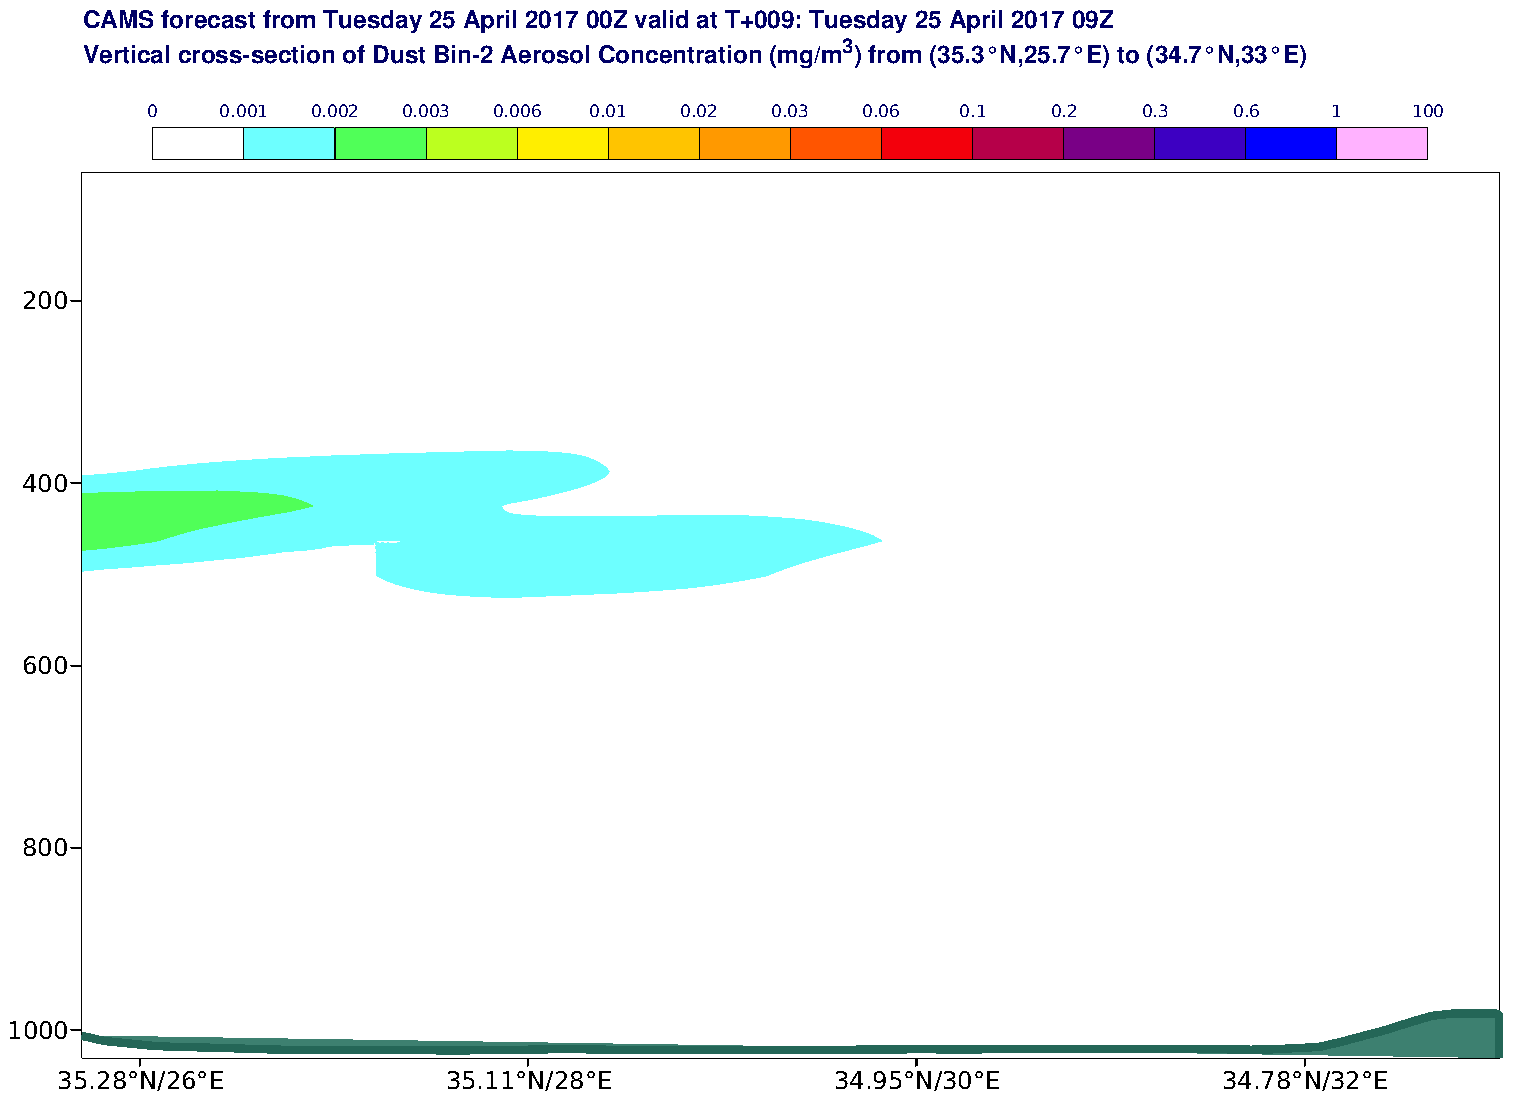 Vertical cross-section of Dust Bin-2 Aerosol Concentration (mg/m3) valid at T9 - 2017-04-25 09:00